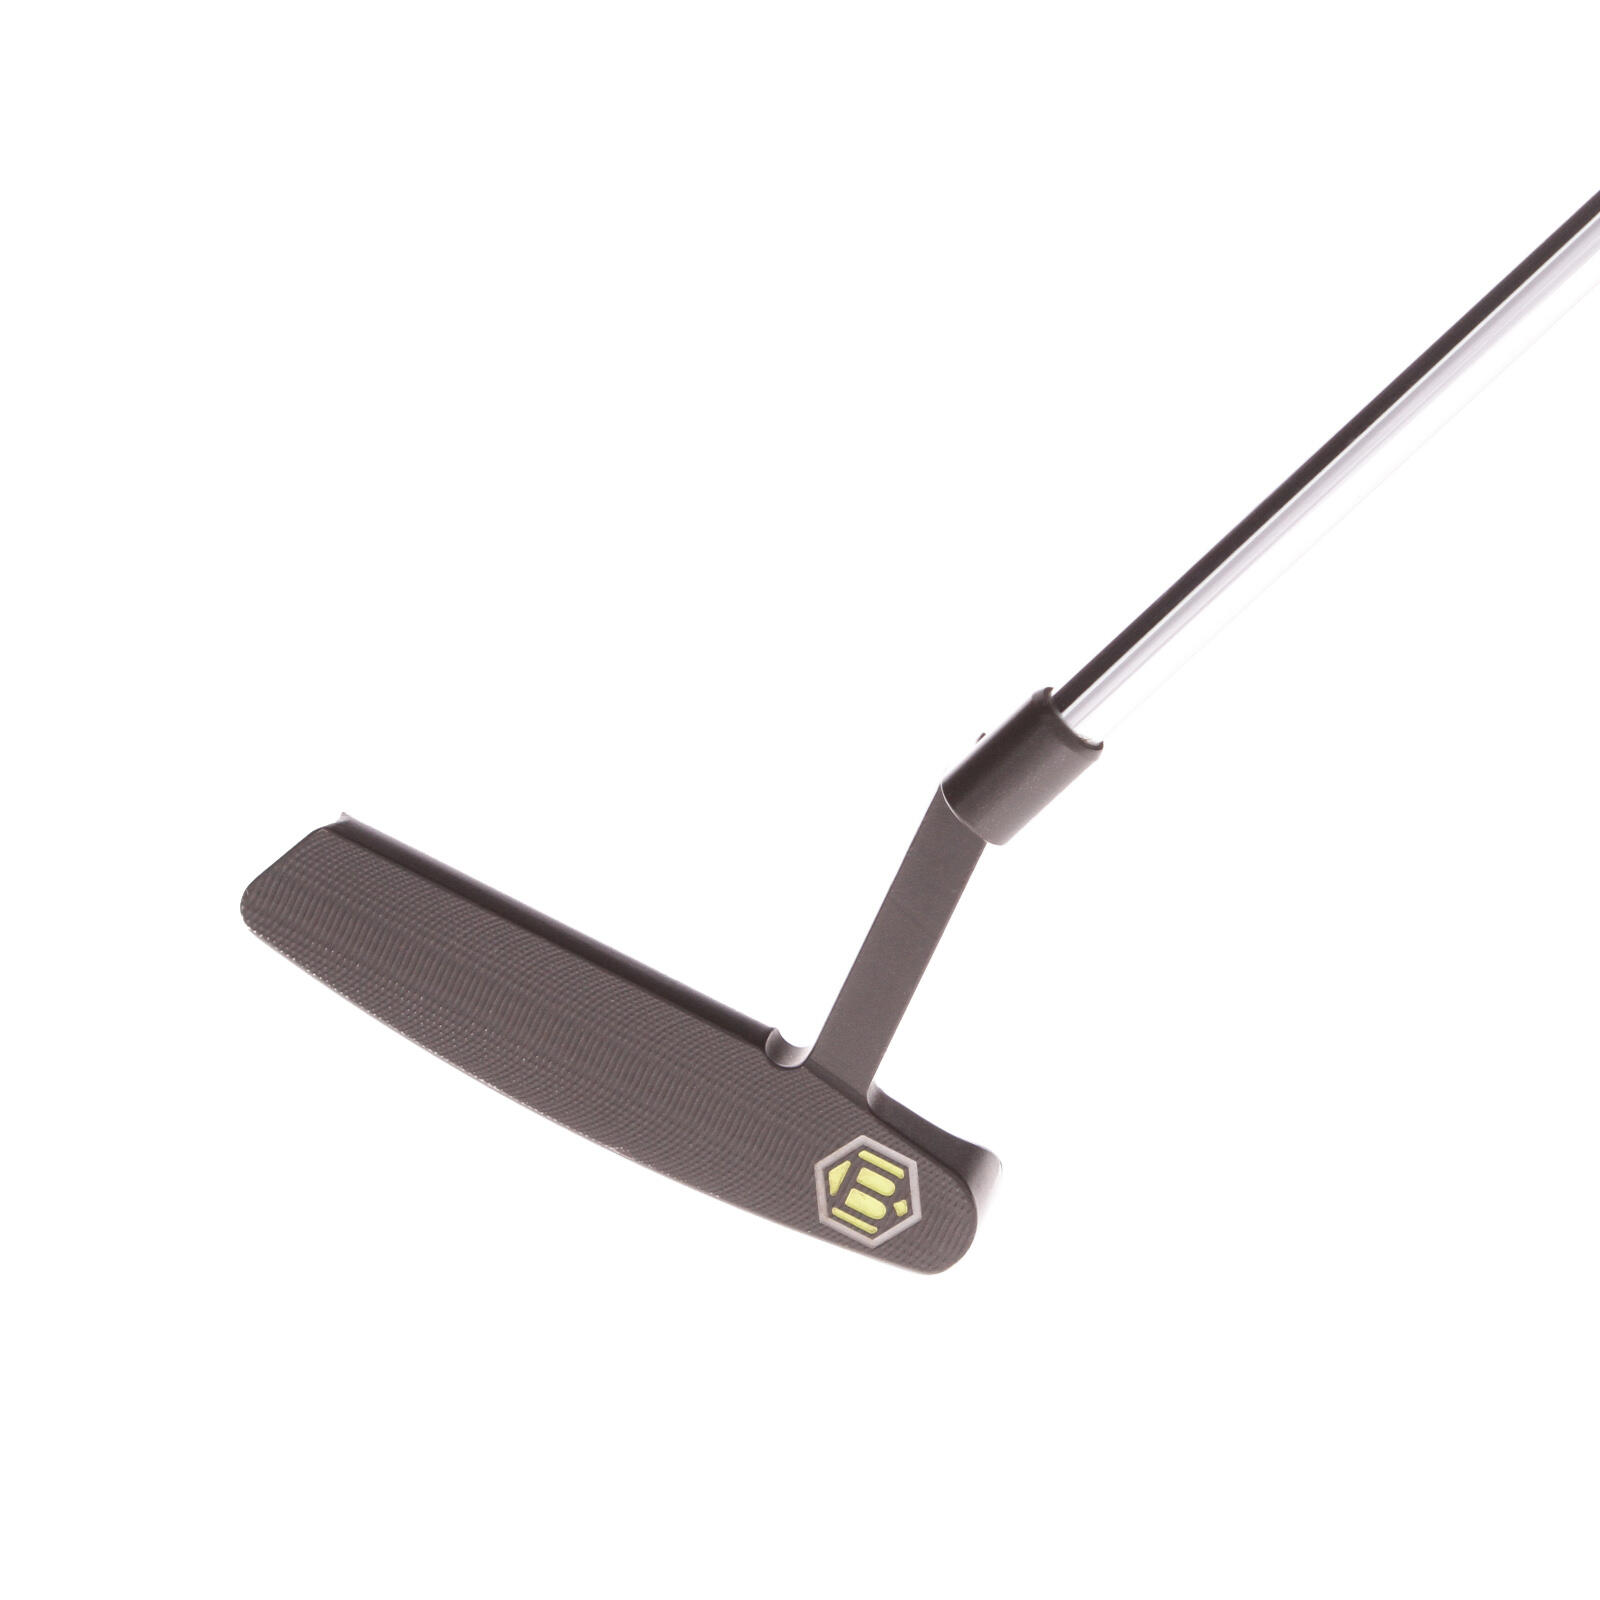 USED - Bettinardi BB1 Putter 33 Inches Length Steel Shaft Right Handed - GRADE B 4/7